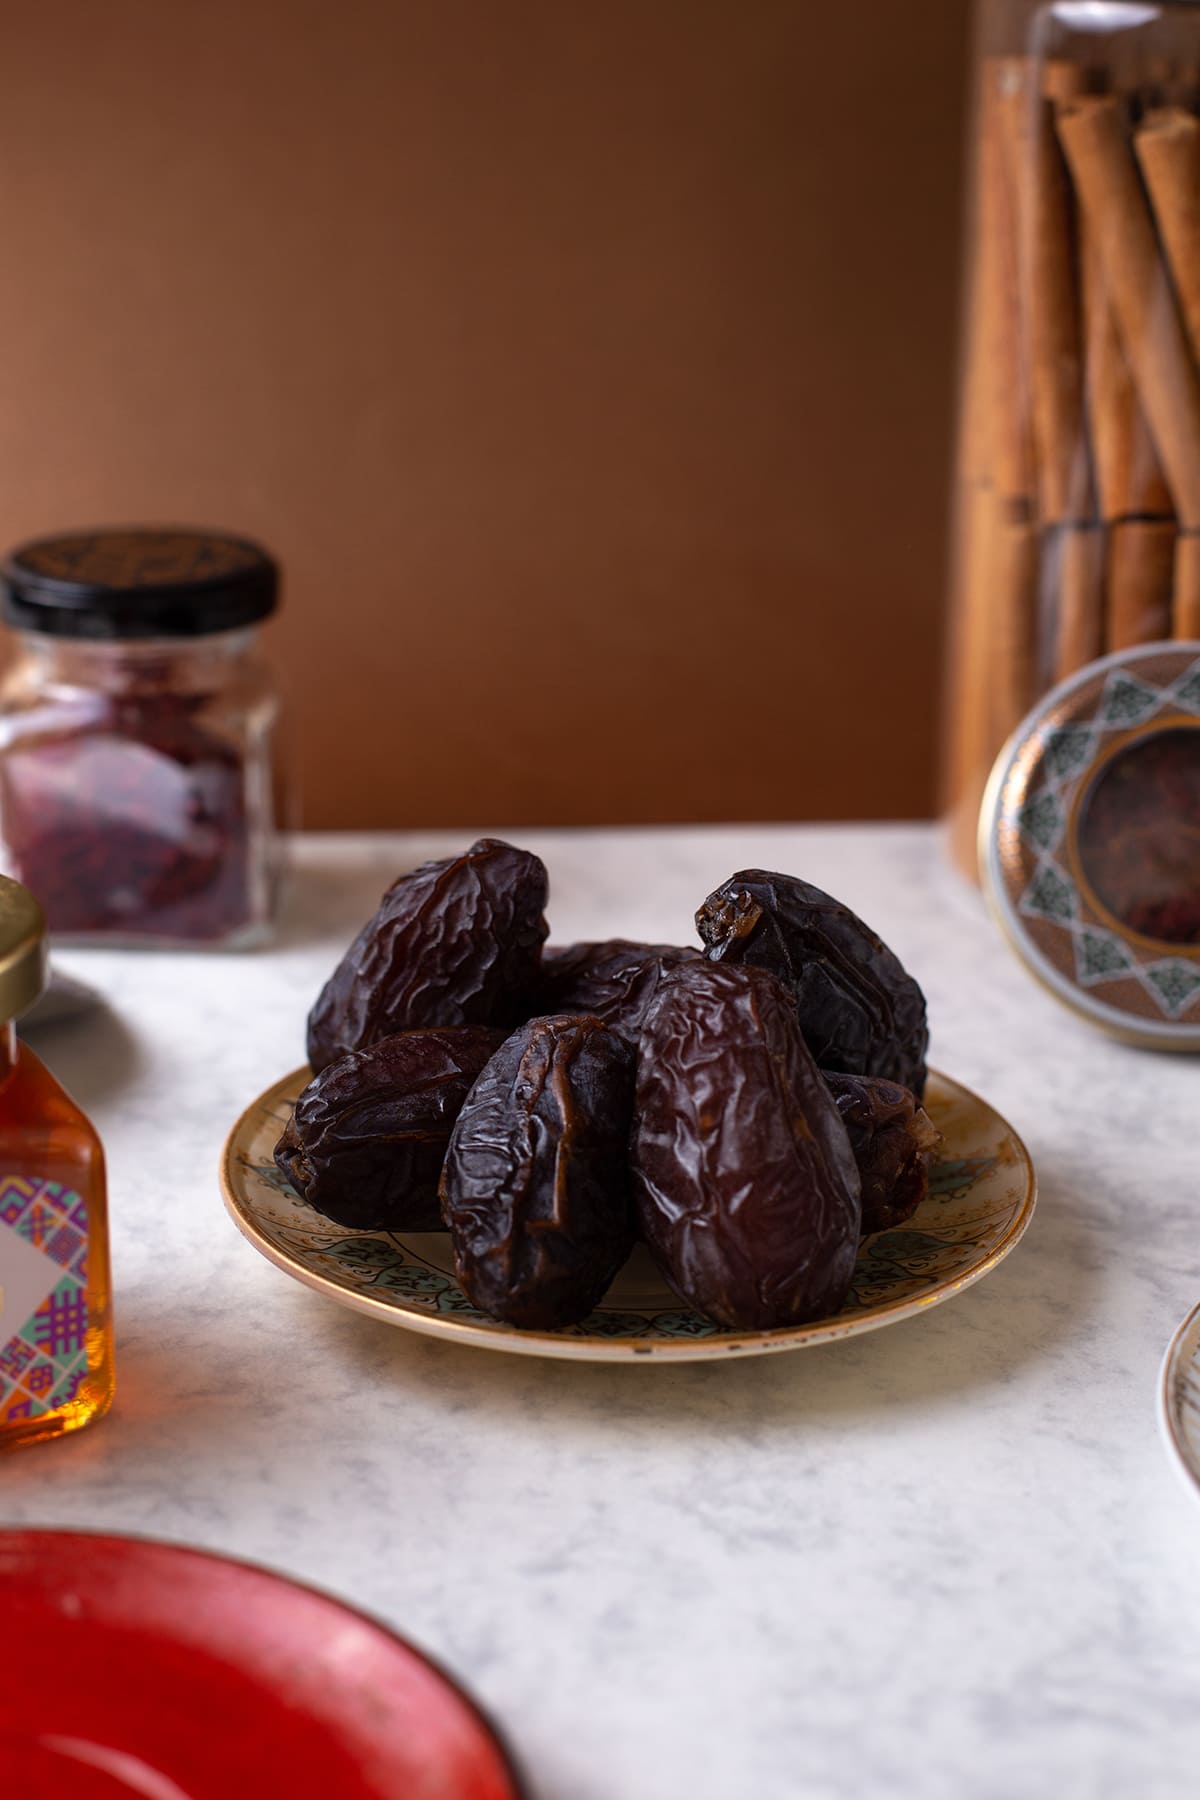 dates in a plate